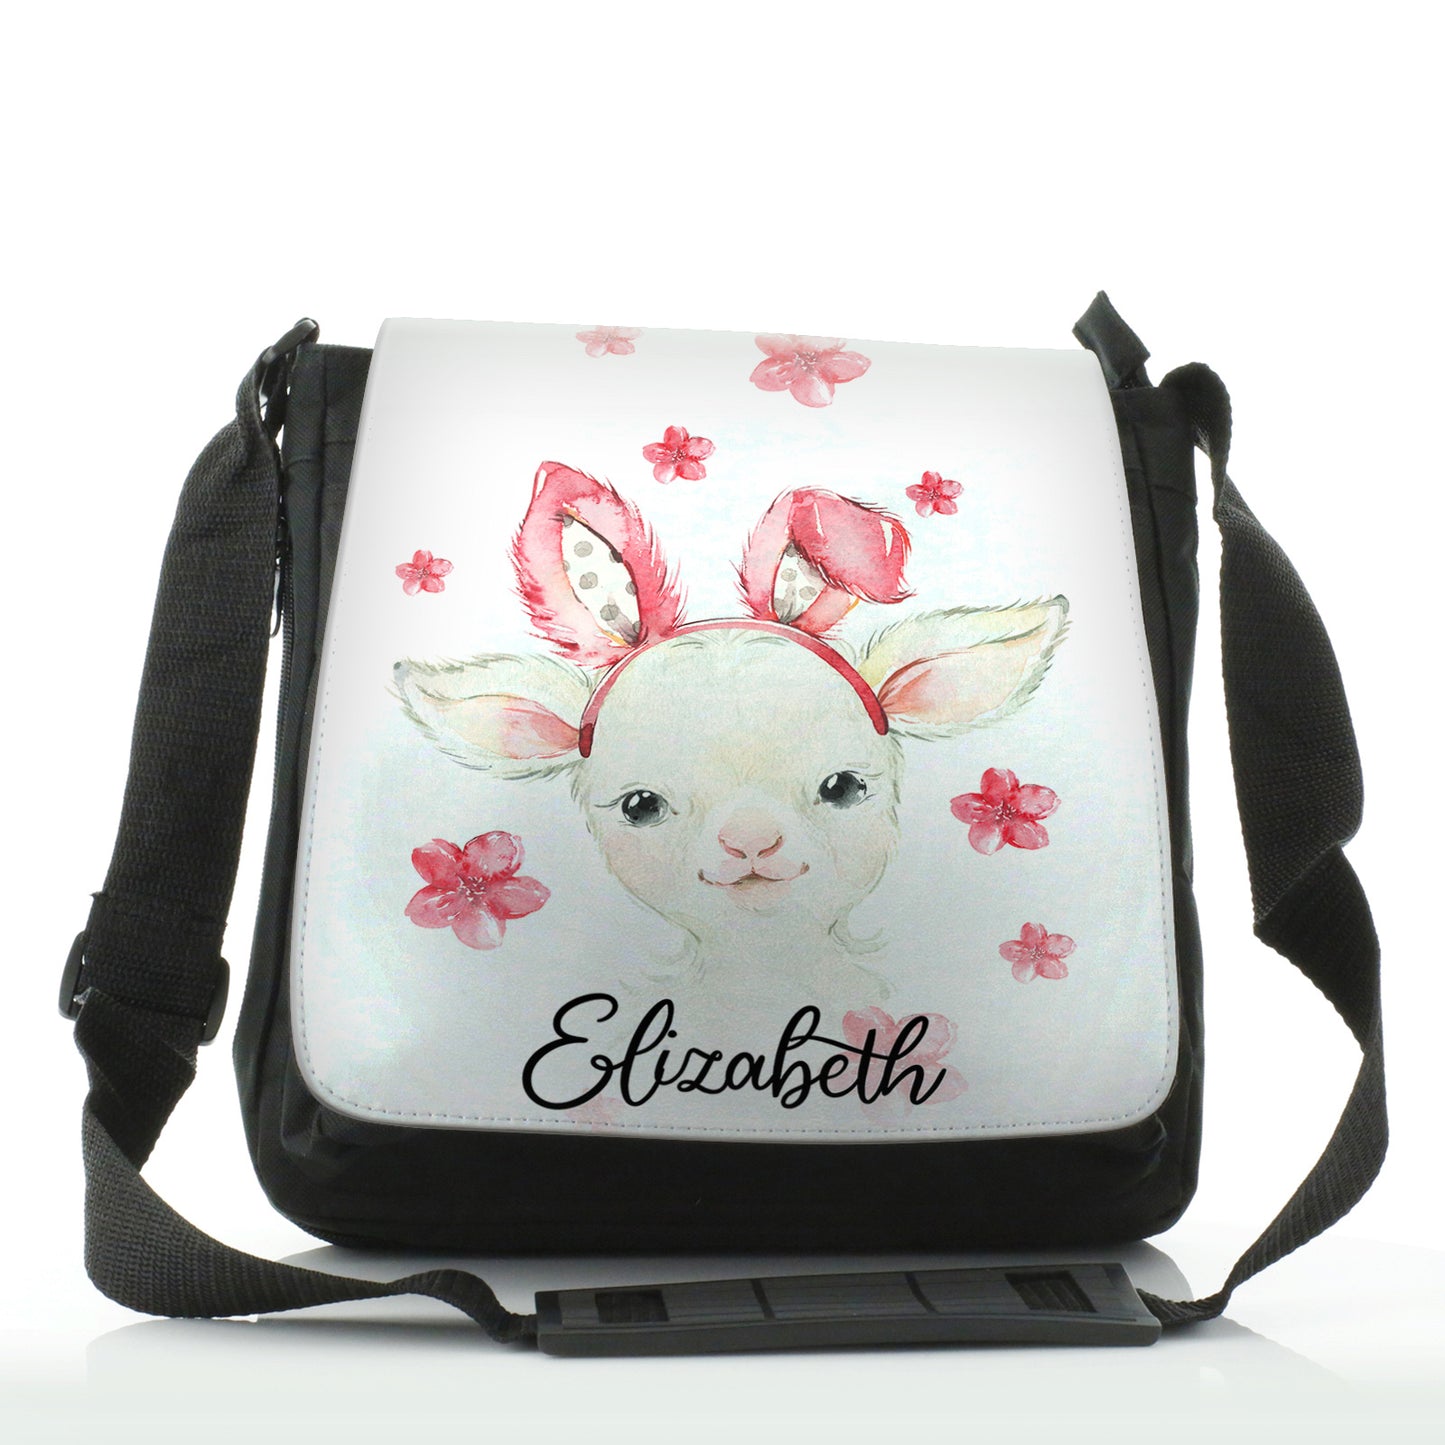 Personalised Shoulder Bag with White Lamb Pink Bunny Ears and Flowers and Cute Text